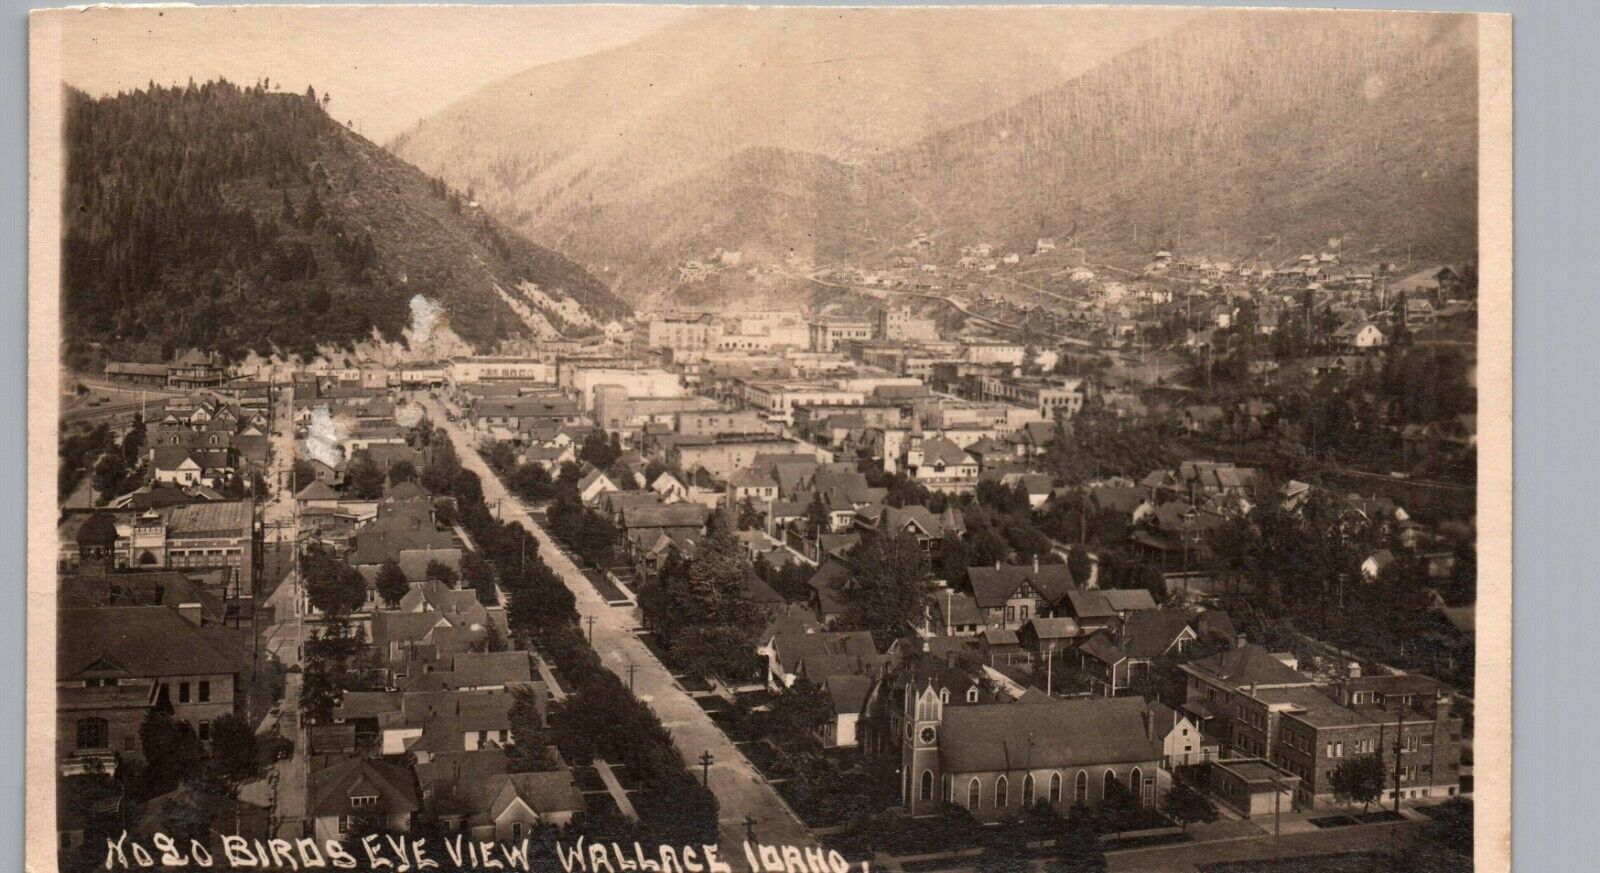 WALLACE IDAHO BIRDS EYE VIEW 1910s real photo postcard rppc antique id ~TRIMMED